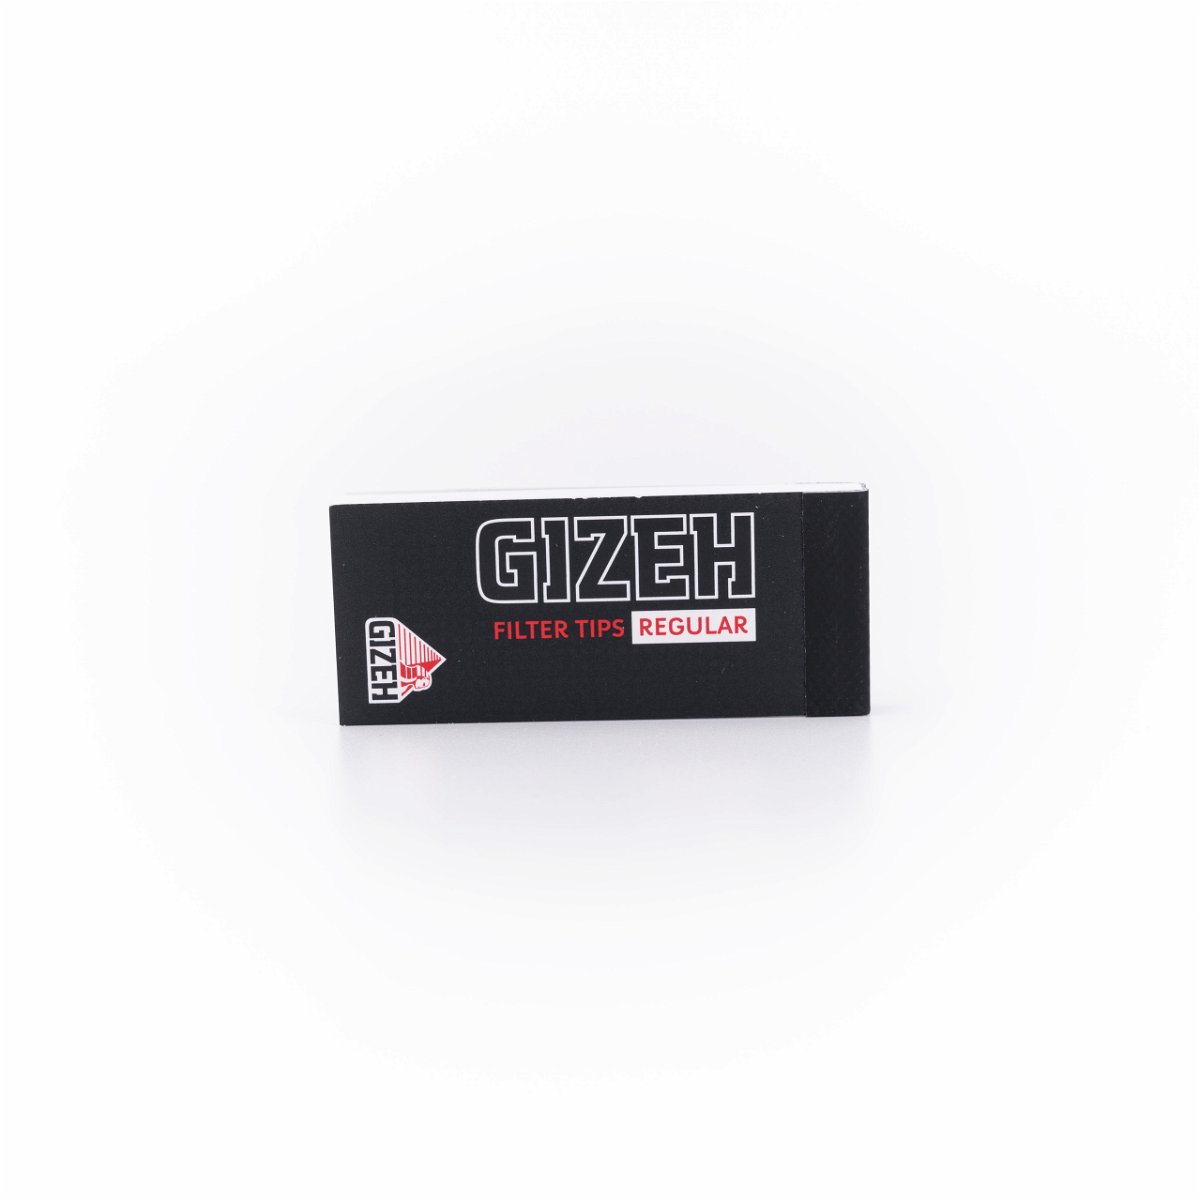 Gizeh Filter Tips